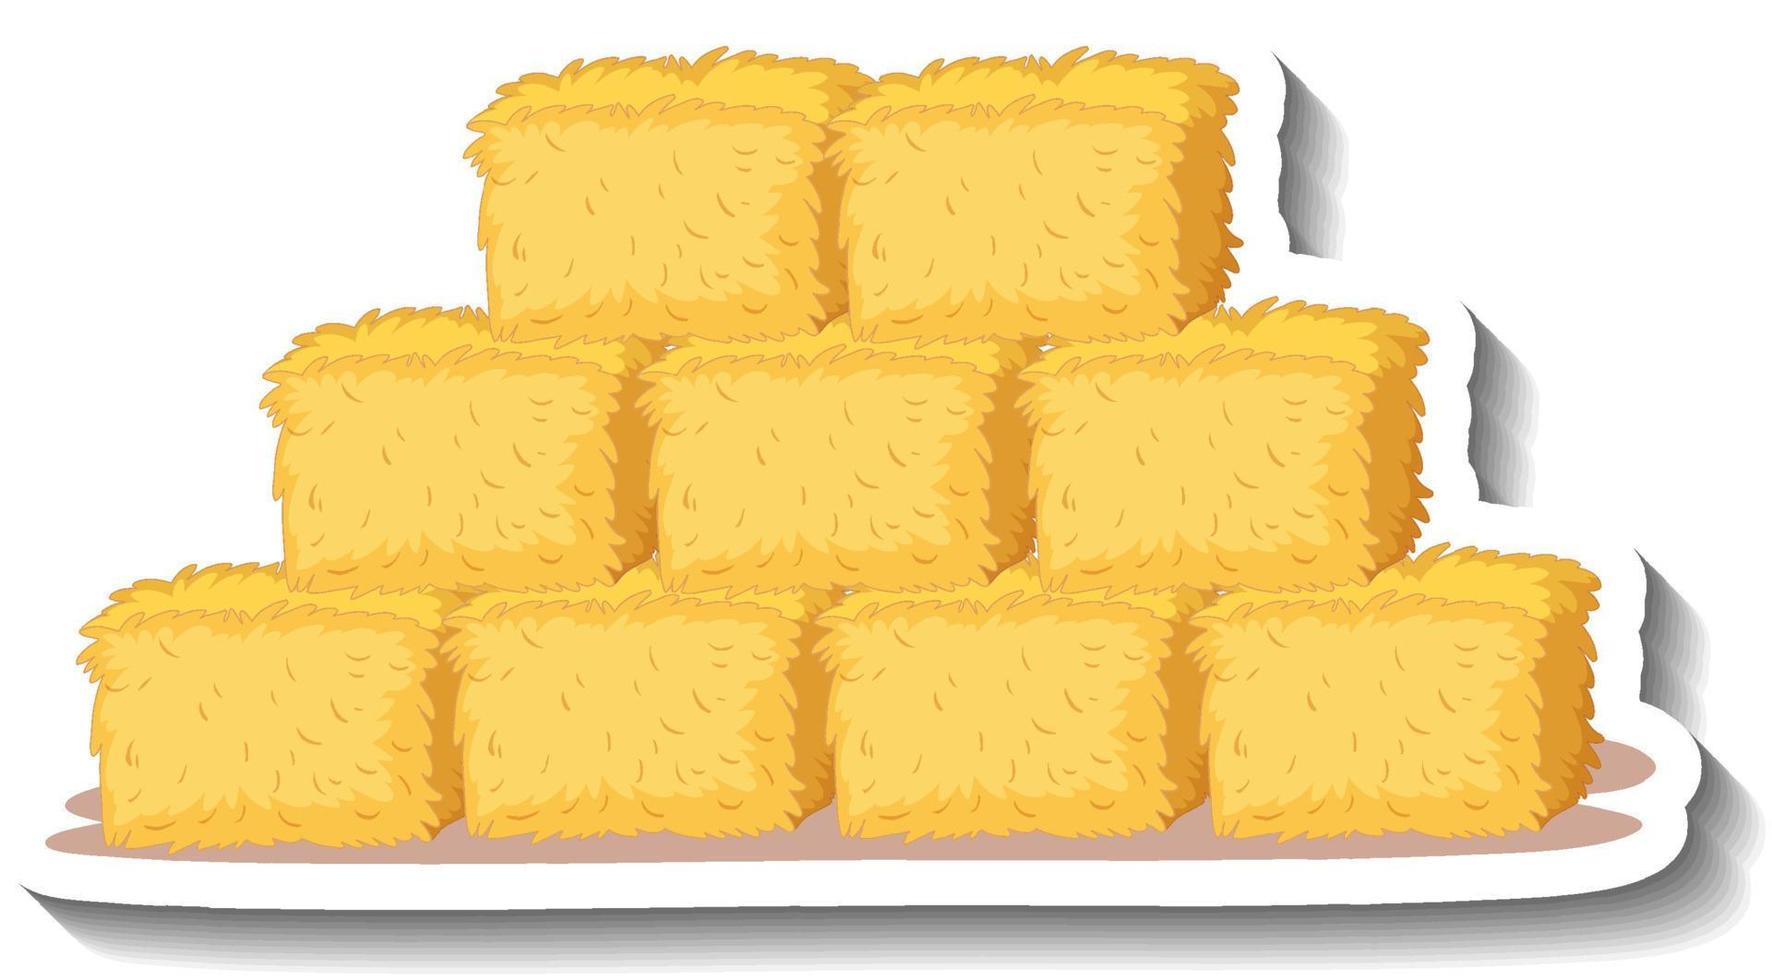 Square haystacks group on white background vector